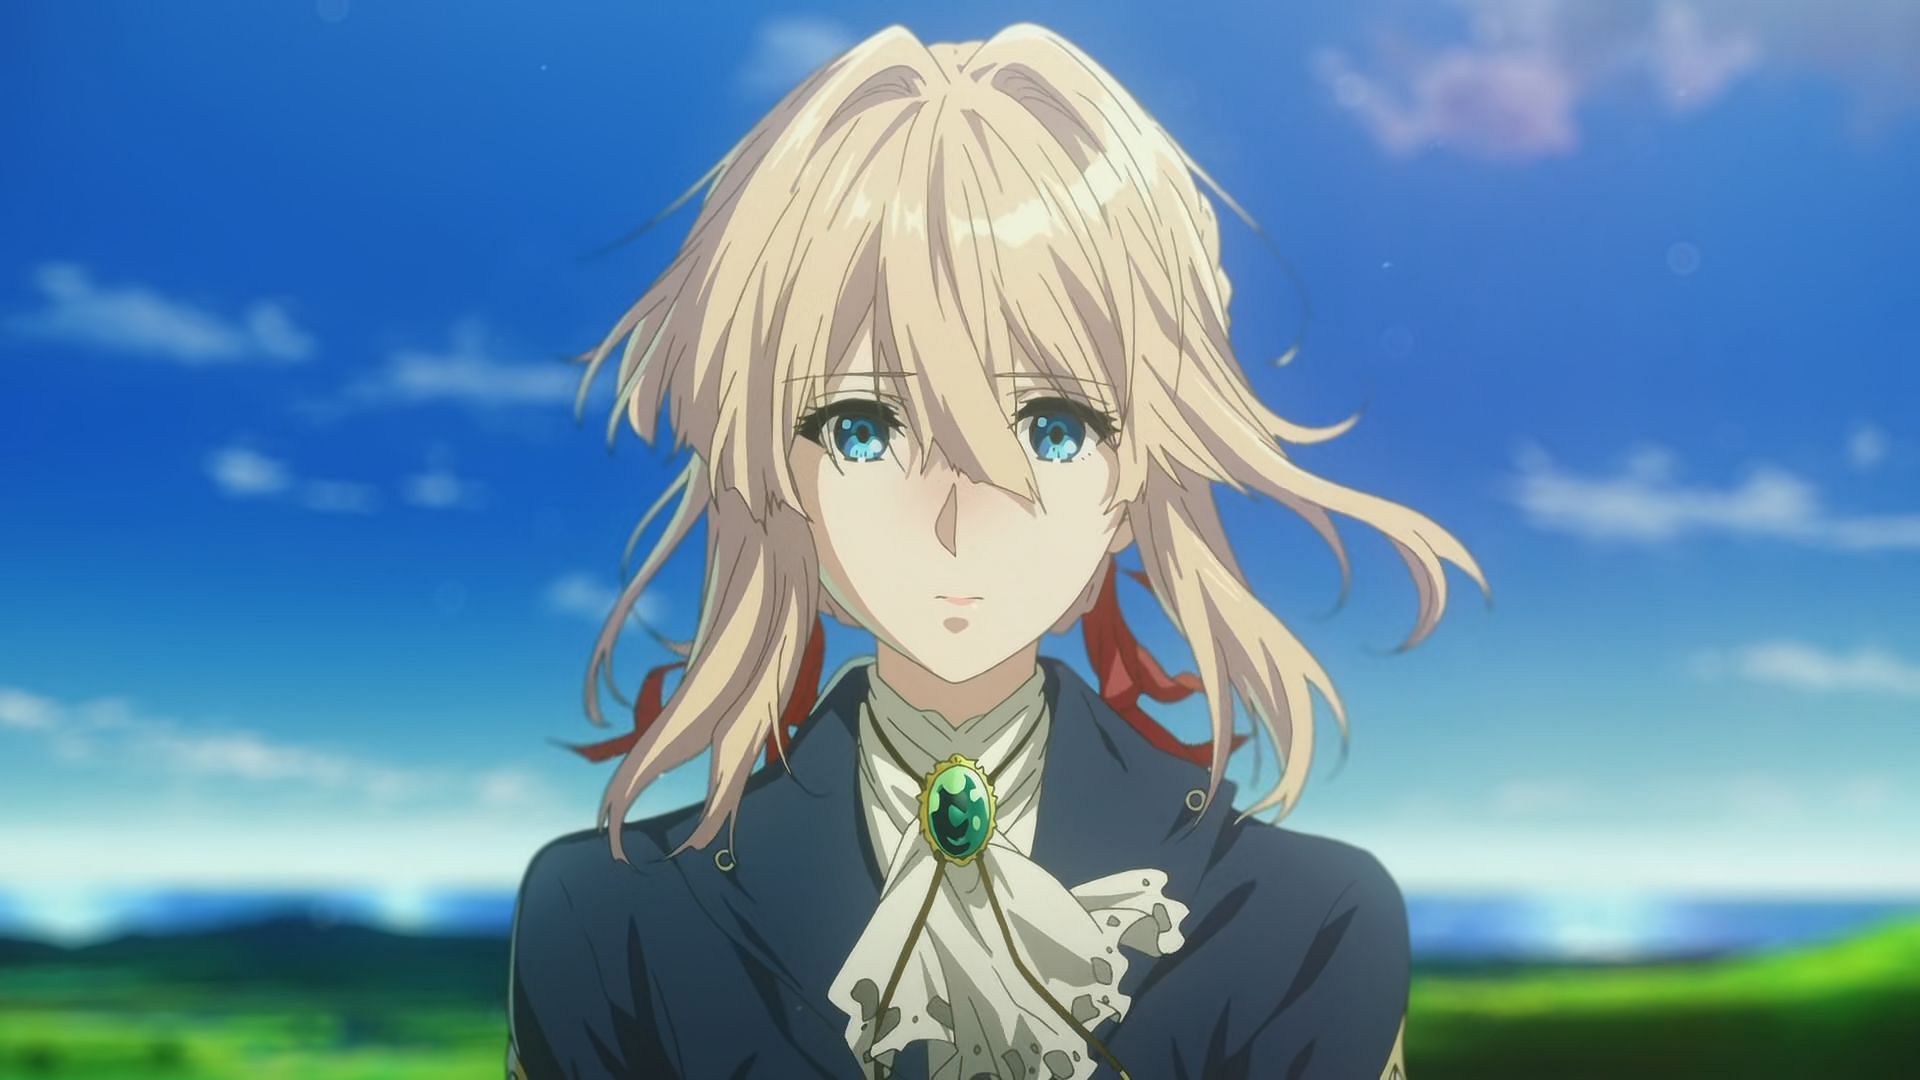 25 Anime Girls with Blue Eyes You Will Fall in Love with at First Sight